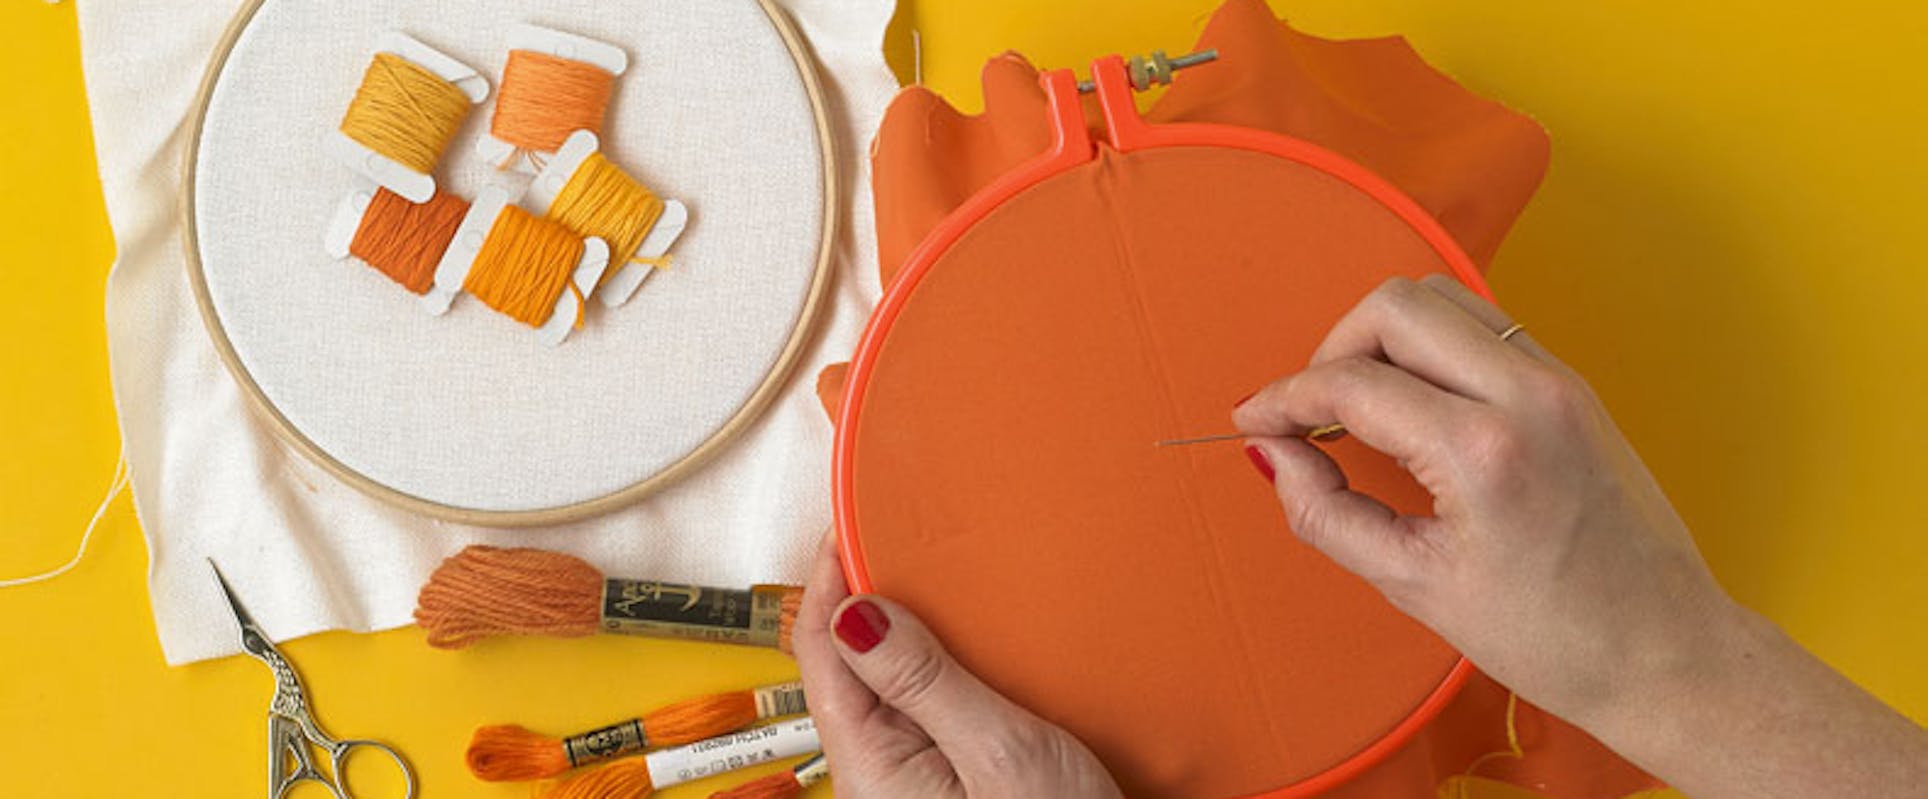 The Best Basic Embroidery Tools and Materials You NEED To Get Started -  Little Red Window